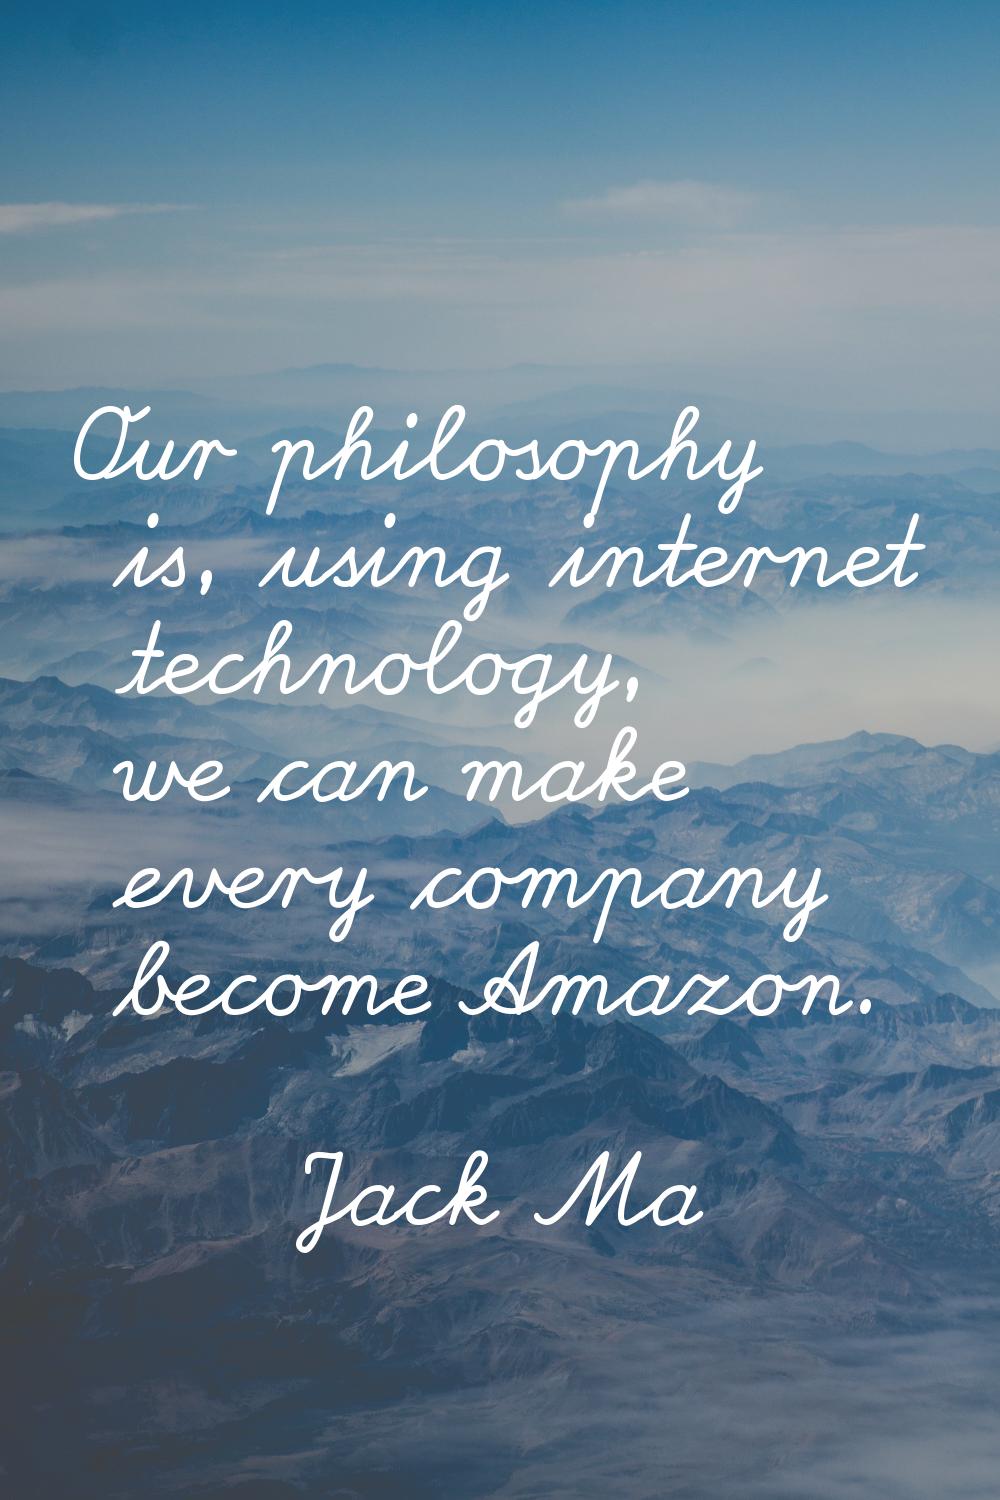 Our philosophy is, using internet technology, we can make every company become Amazon.